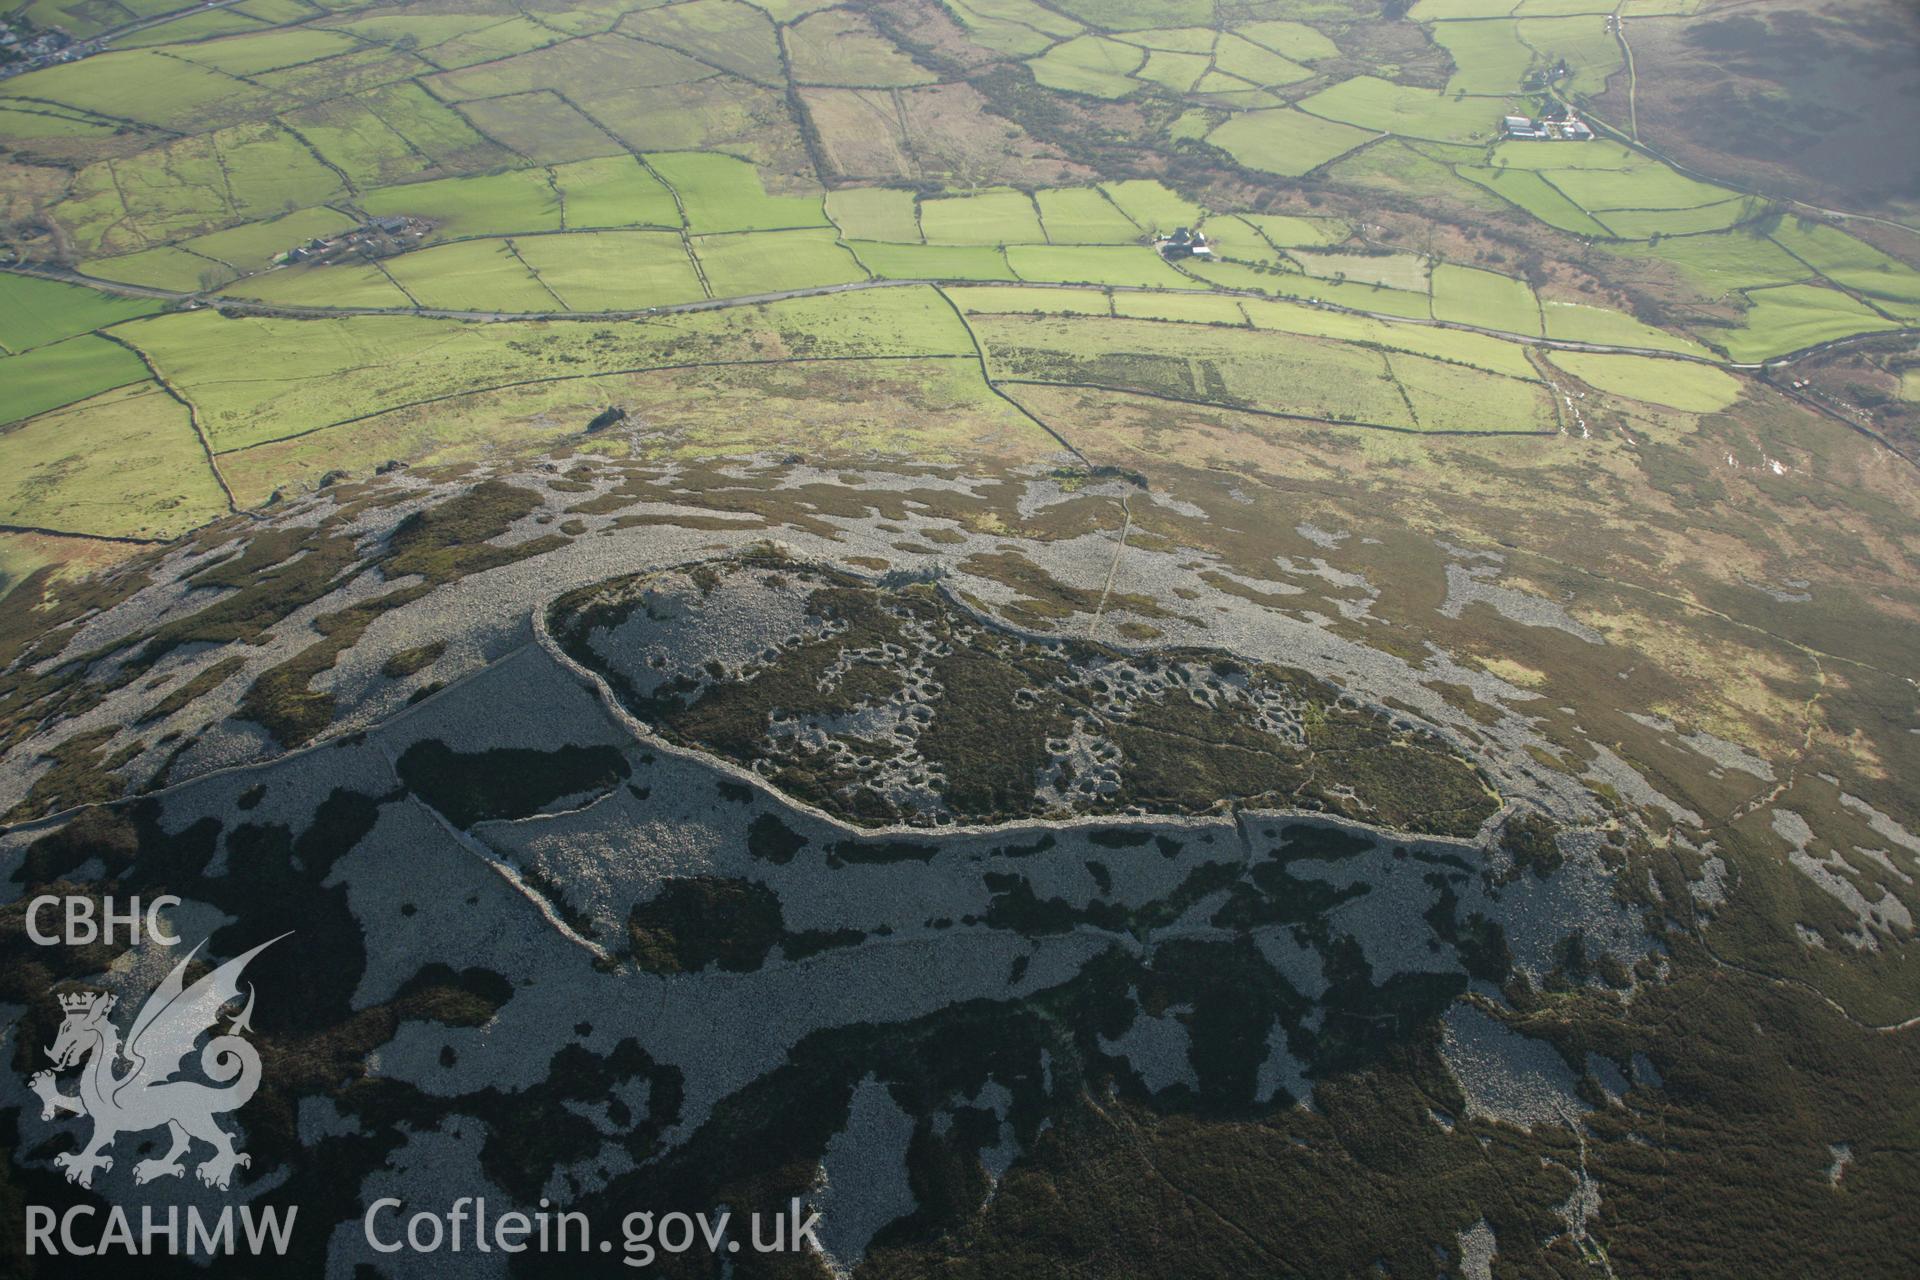 RCAHMW colour oblique aerial photograph of Tre'r Ceiri Fort, Llanaelhaearn. Taken on 25 January 2007 by Toby Driver